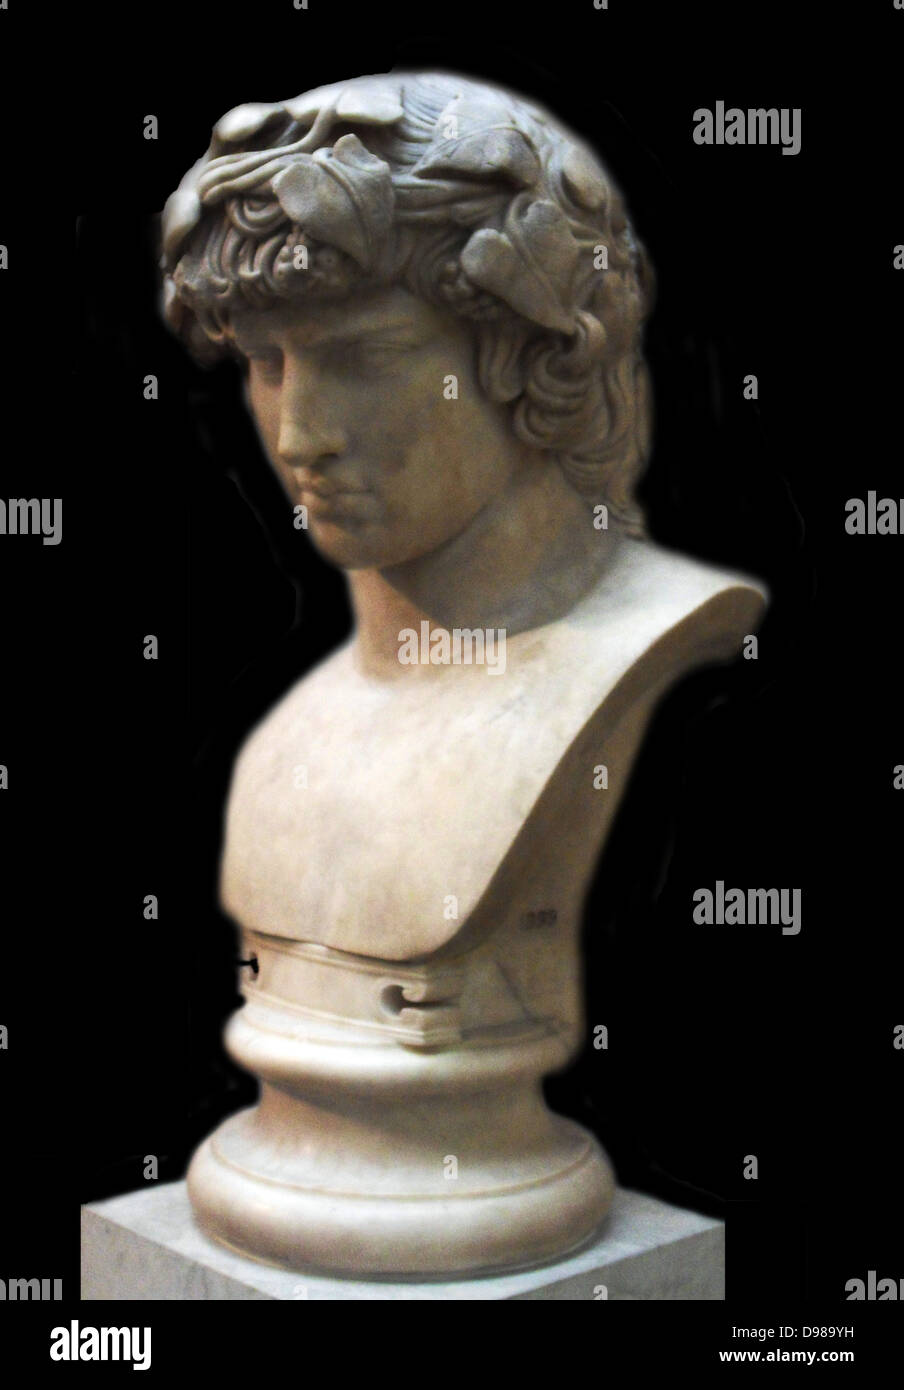 Roman marble bust of Antinous  died AD 130.  Lover of Hadrian, drownd in the River Nile in Egypt. Stock Photo